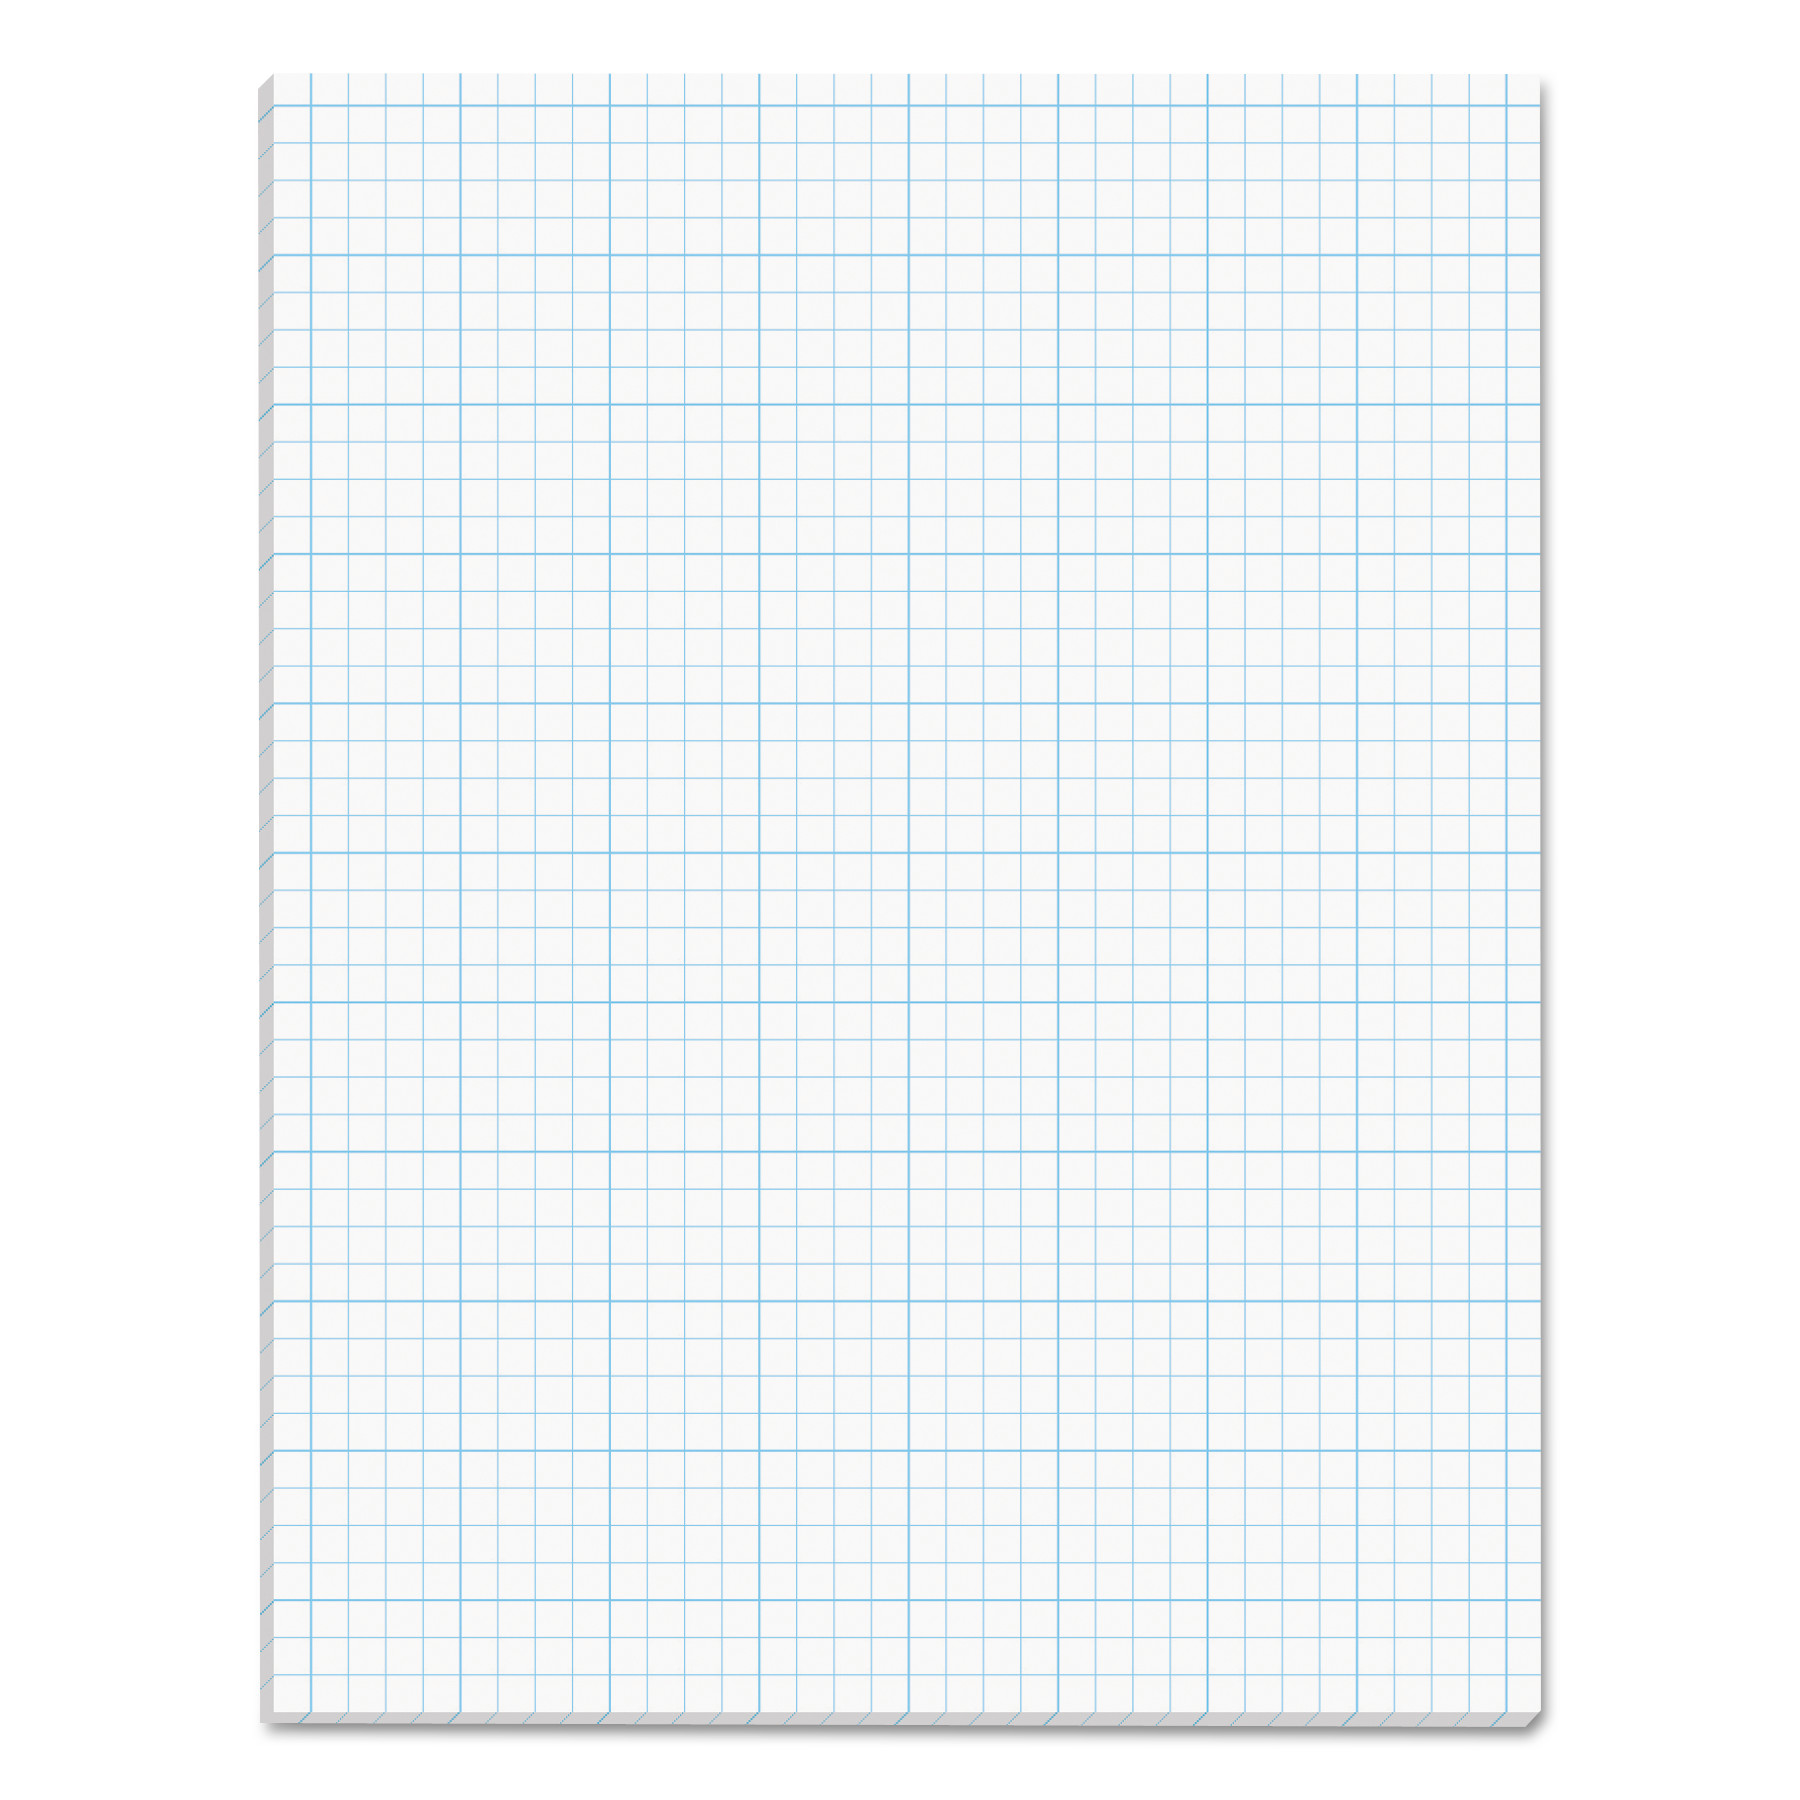  TOPS 35041 Cross Section Pads, 4 sq/in Quadrille Rule, 8.5 x 11, White, 50 Sheets (TOP35041) 